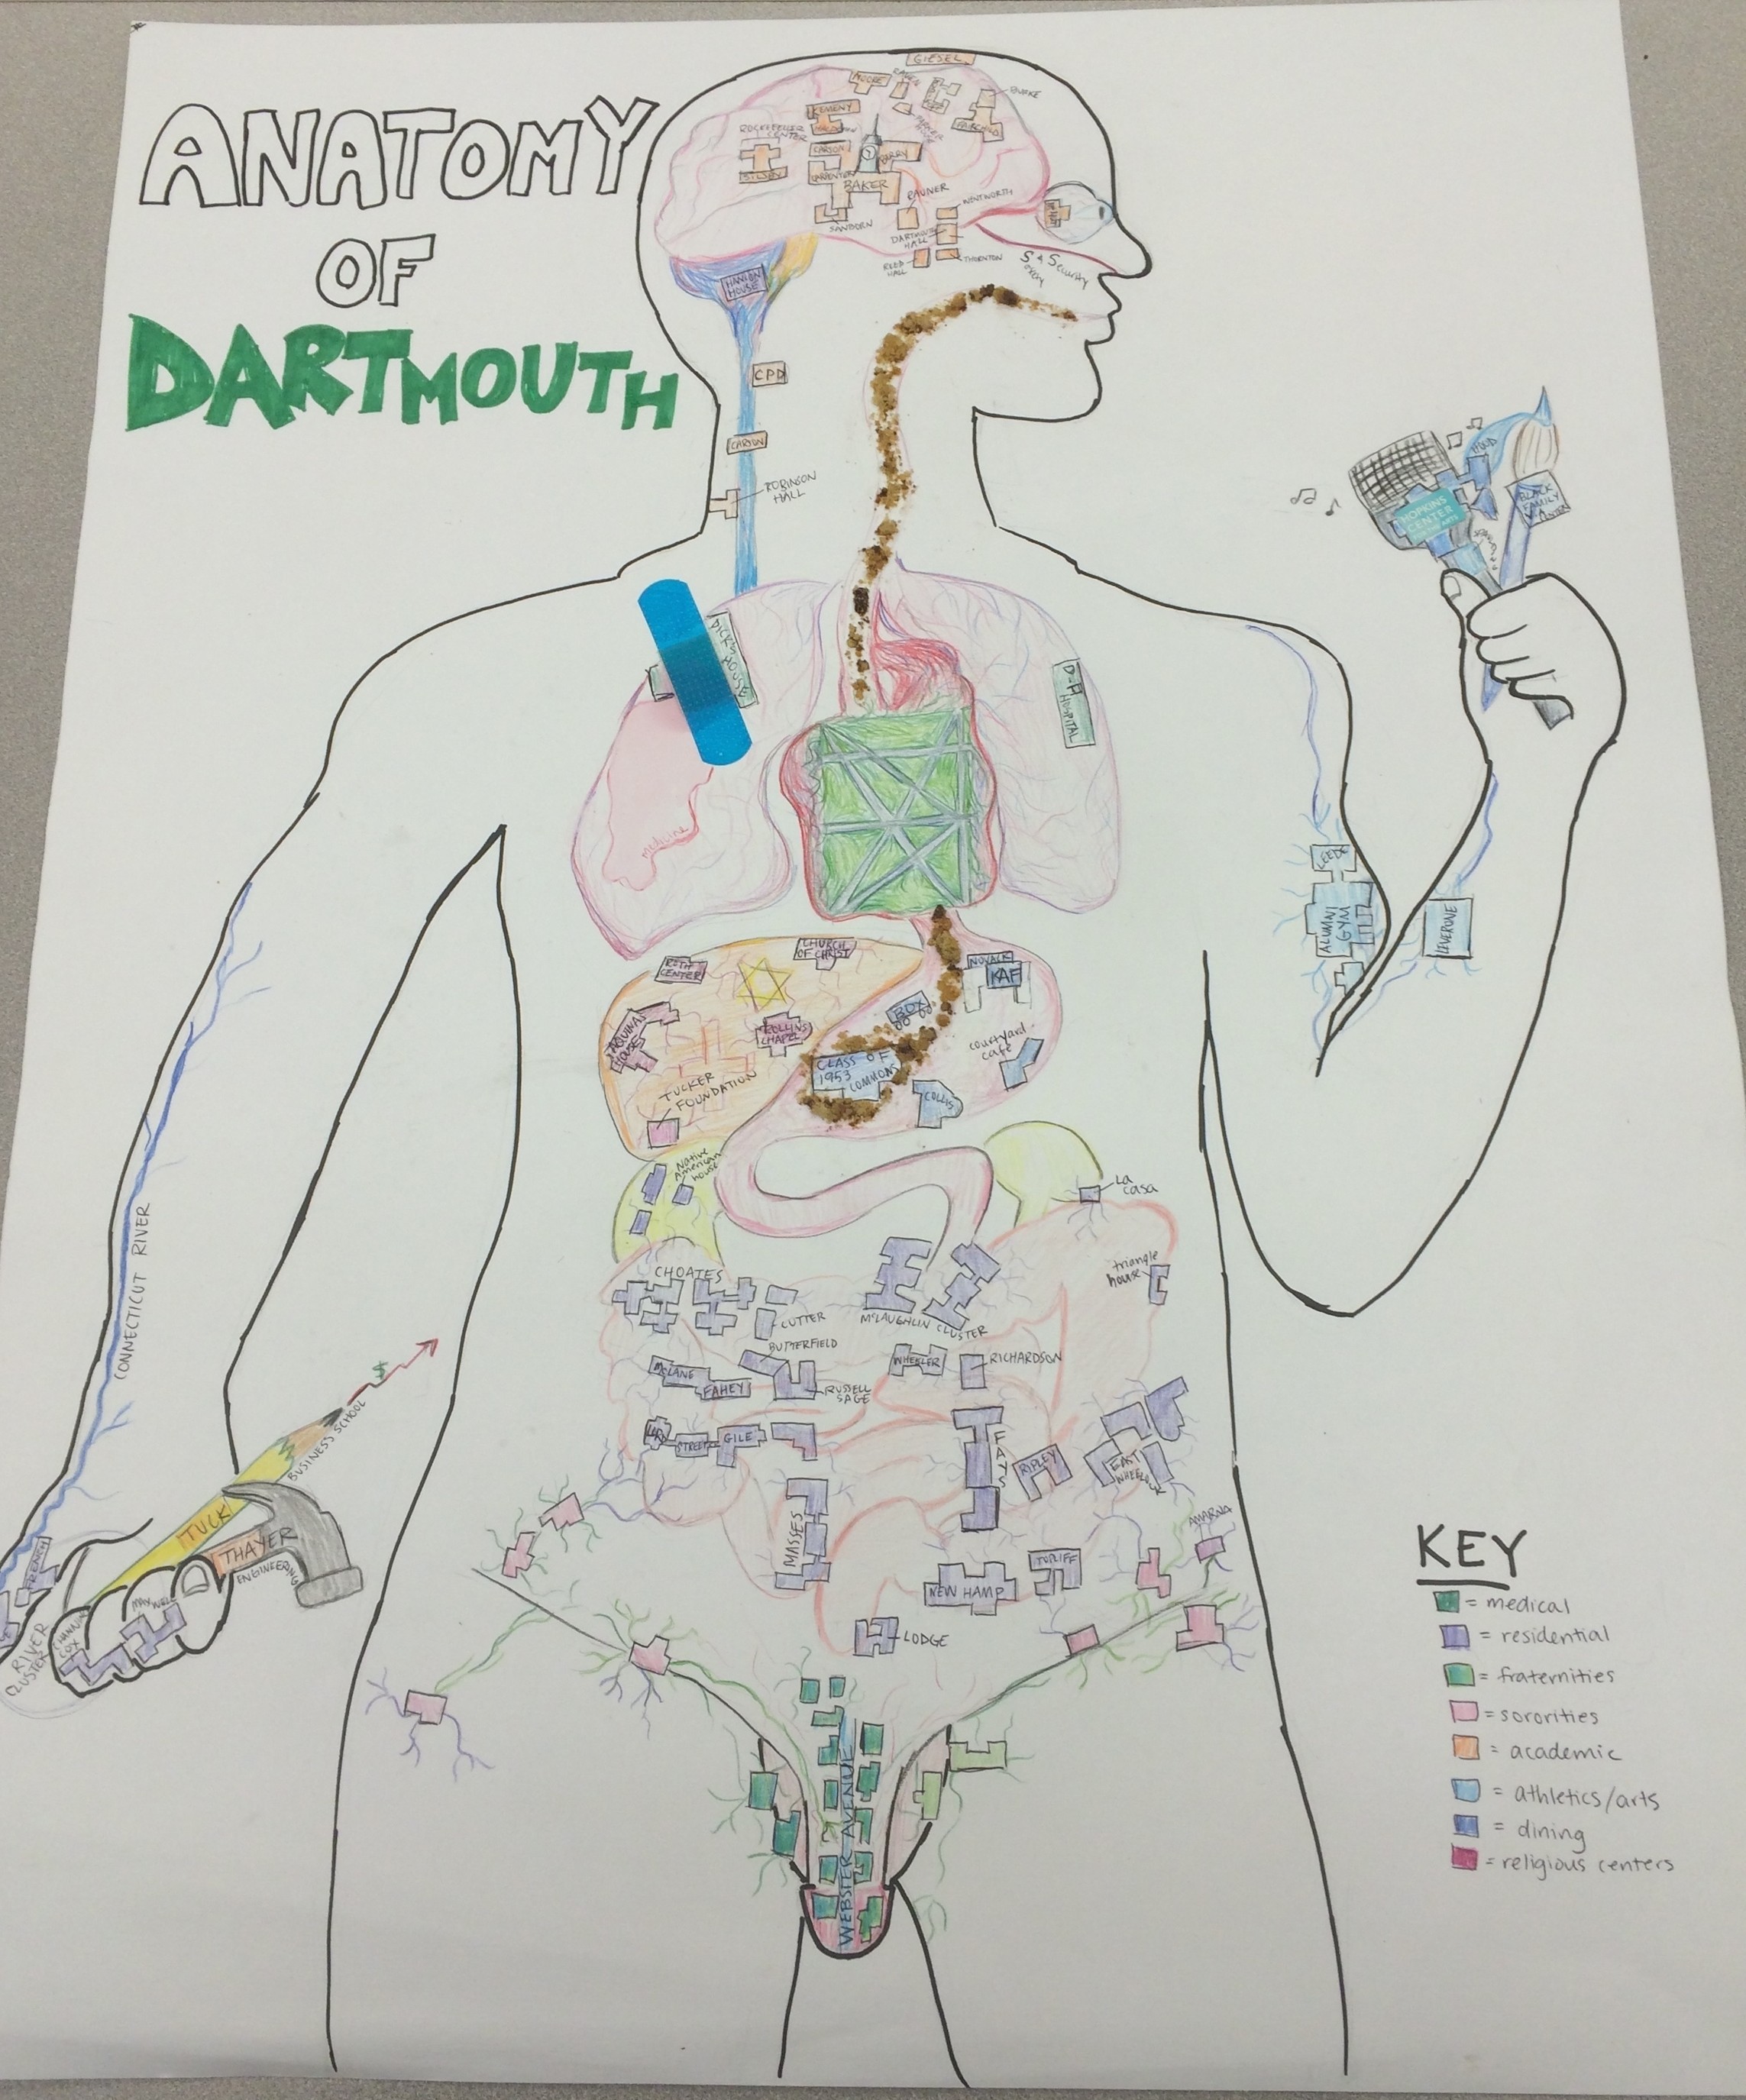 Mapping Dartmouth: an anatomical approach